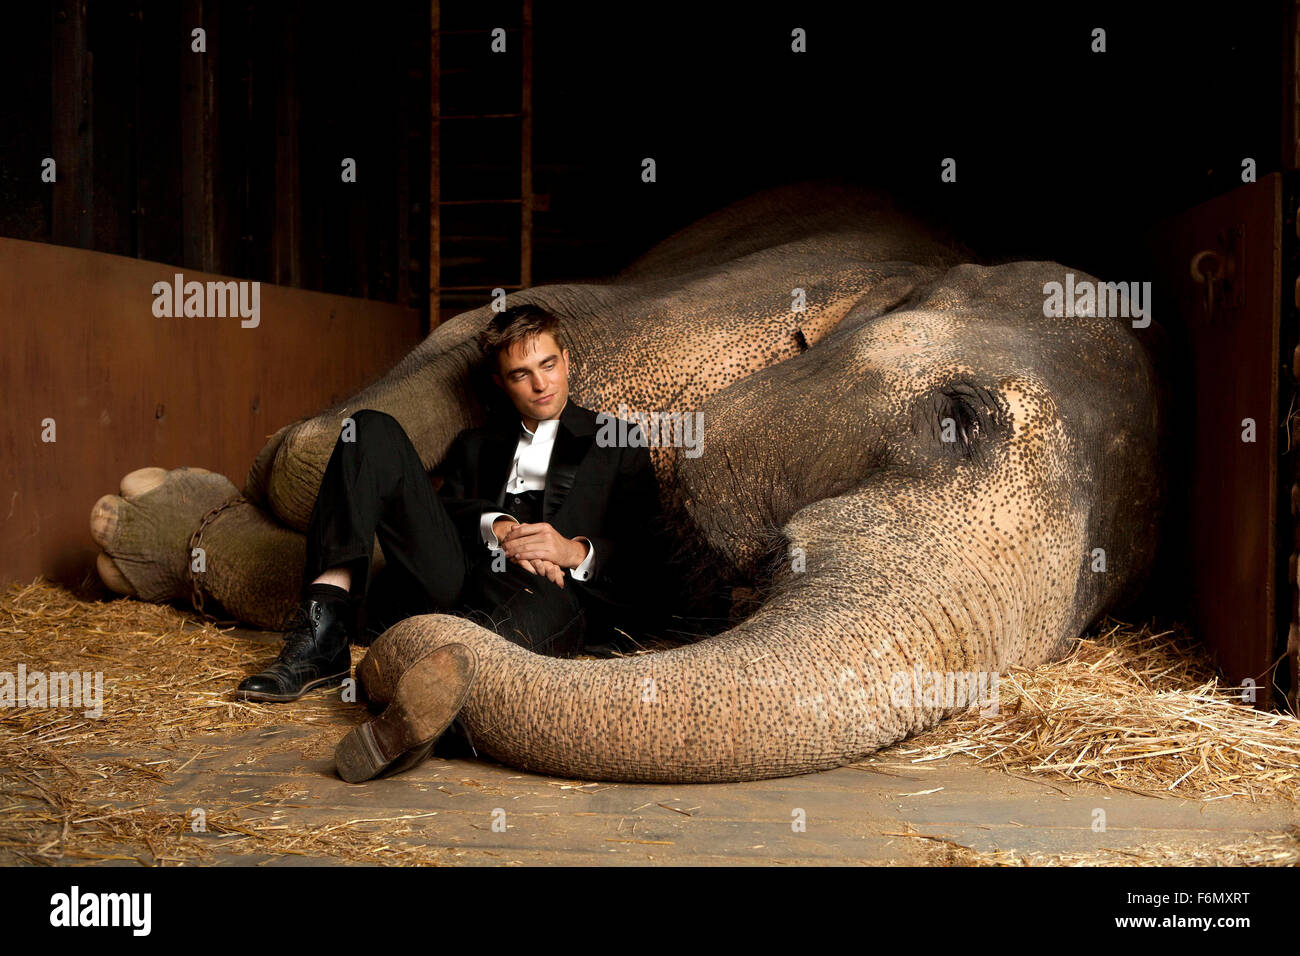 RELEASE DATE: April 22, 2011  MOVIE TITLE: Water for Elephants  STUDIO: 3 Arts Entertainment  DIRECTOR: Francis Lawrence  PLOT: A veterinary student abandons his studies after his parents are killed and joins a traveling circus as their vet  PICTURED: ROBERT PATTINSON as Jacob Jankowski  (Credit Image: c 3 Arts Entertainment/Entertainment Pictures) Stock Photo